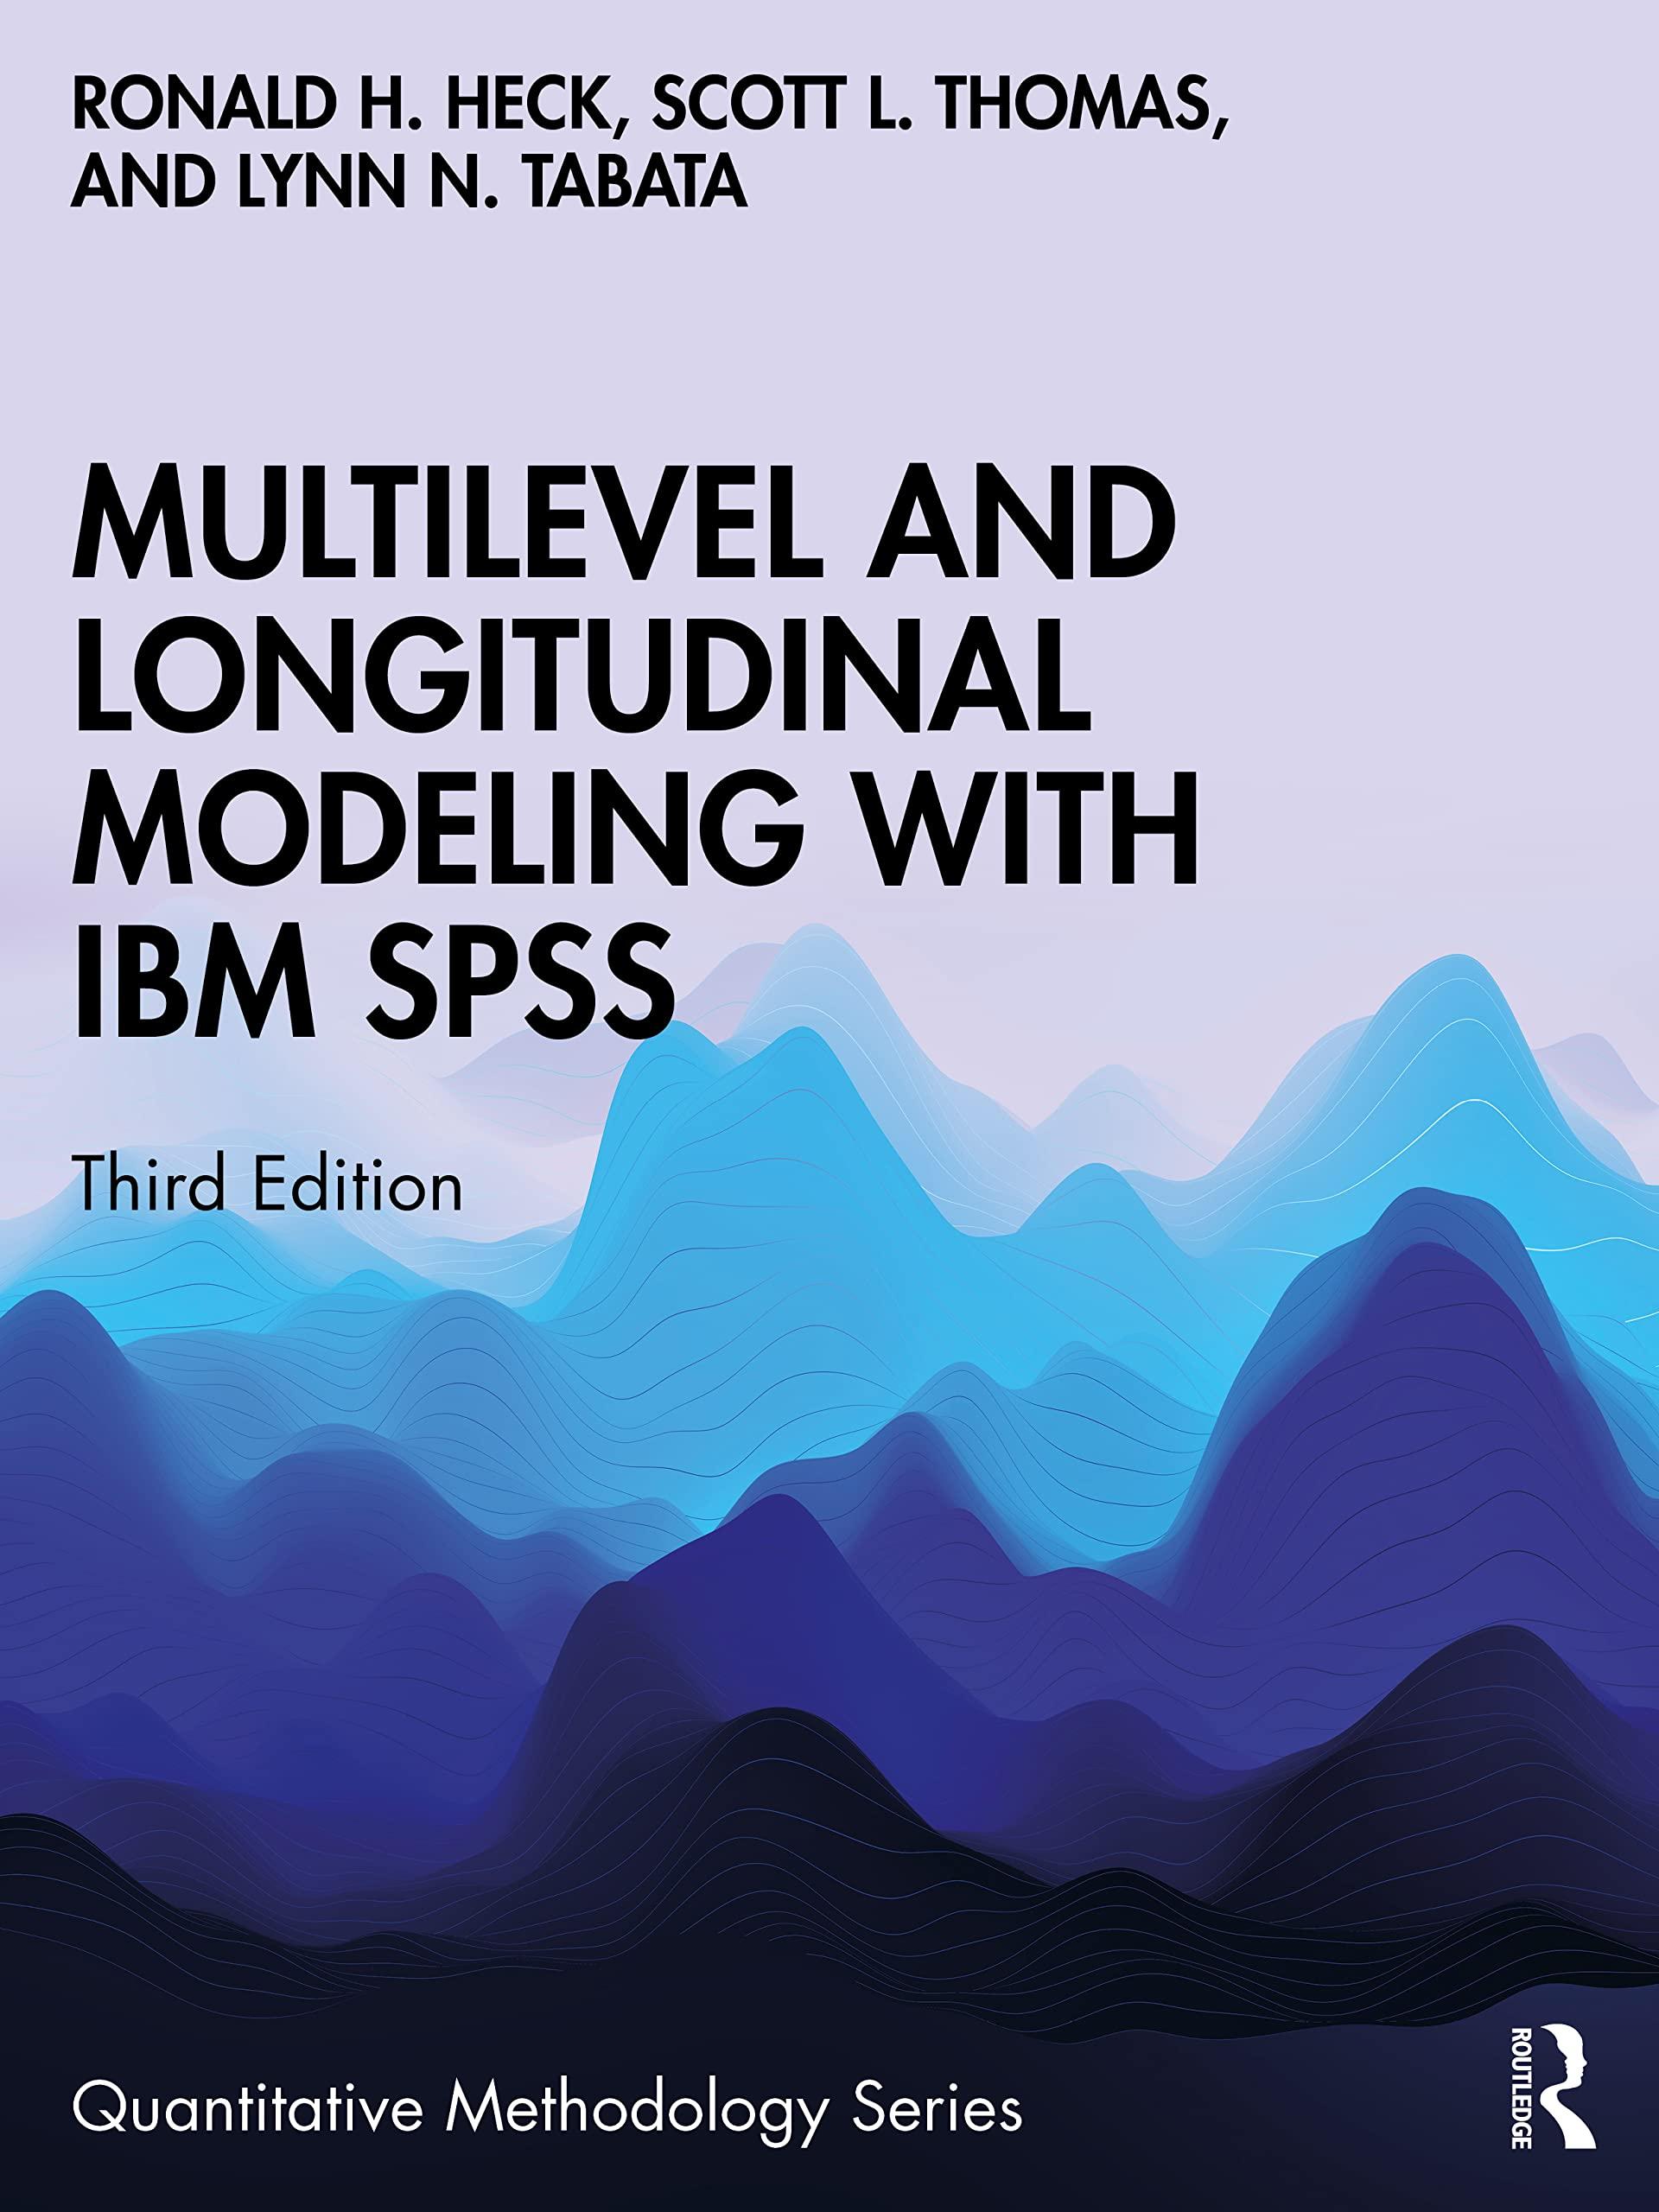 multilevel and longitudinal modeling with ibm spss 3rd edition ronald h. heck, scott l. thomas, lynn n.